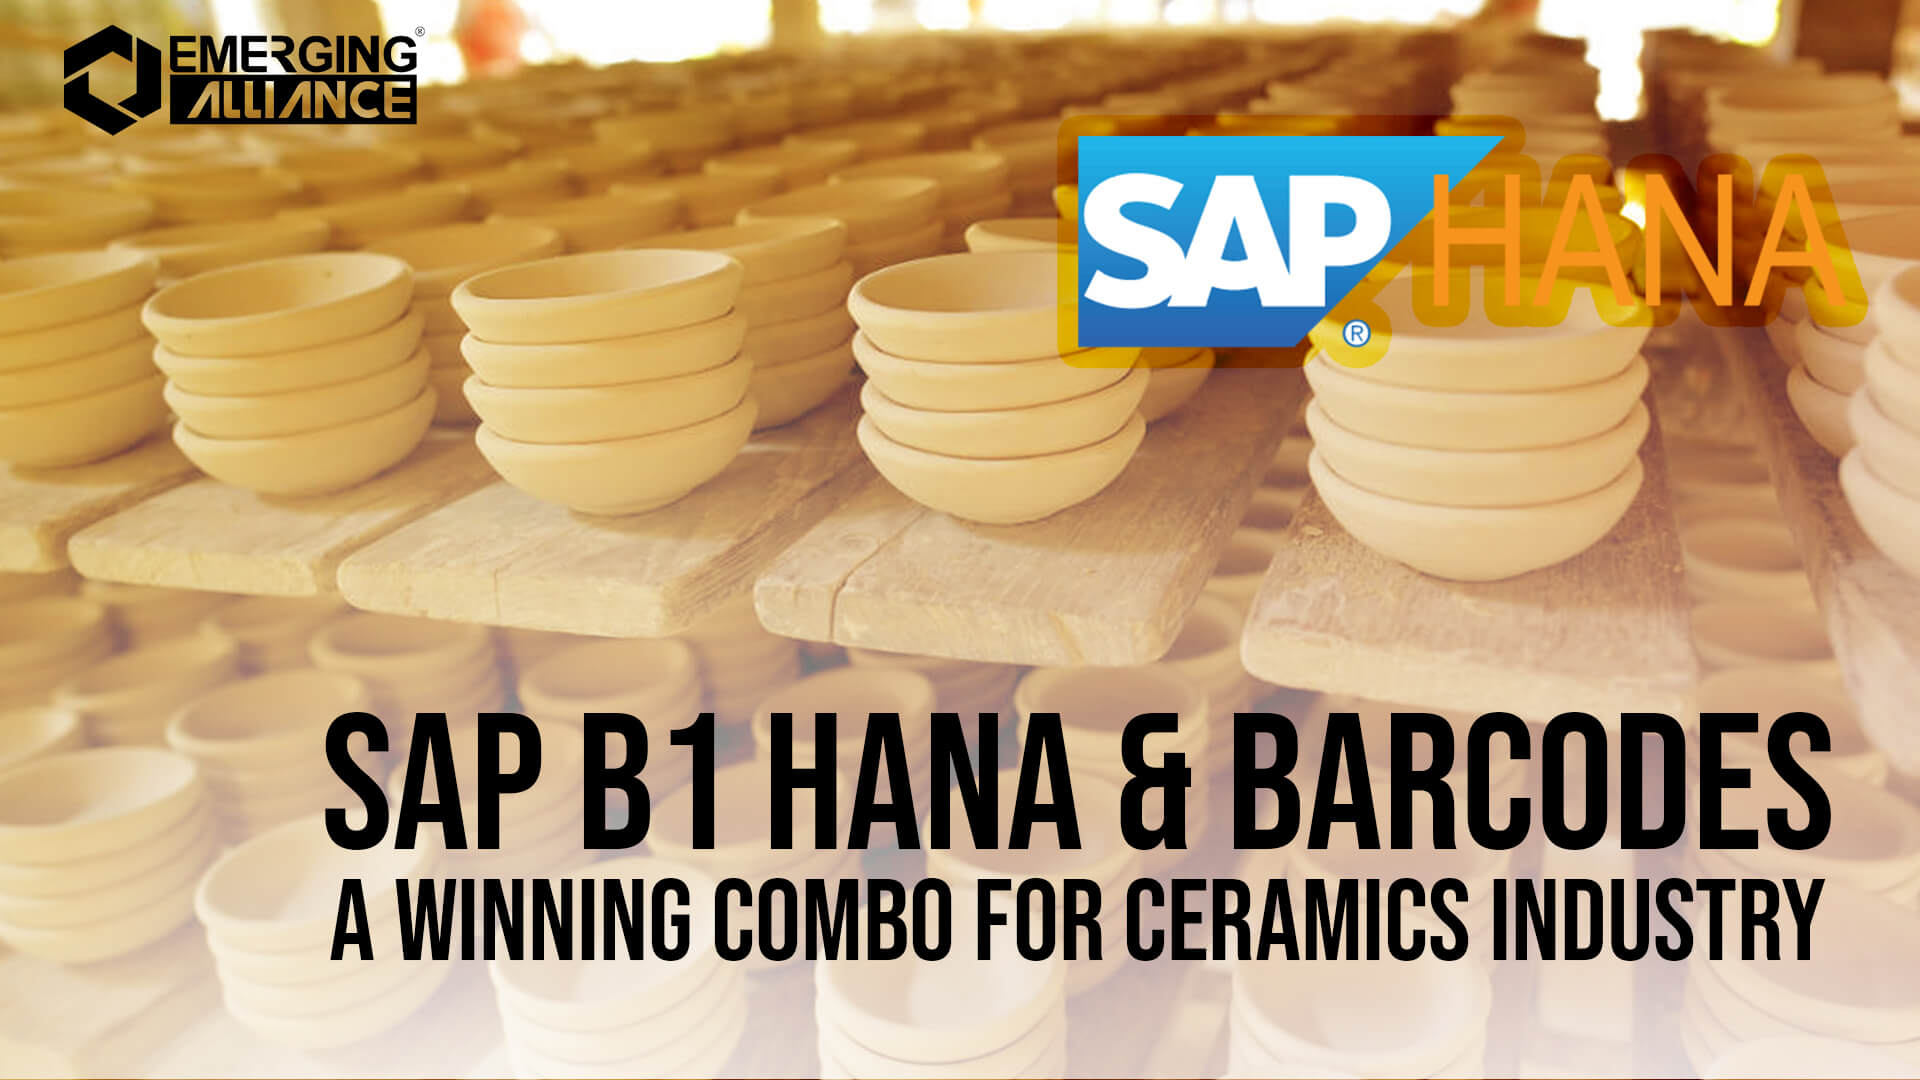 SAP Business one HANA & Barcodes for ceramics industry